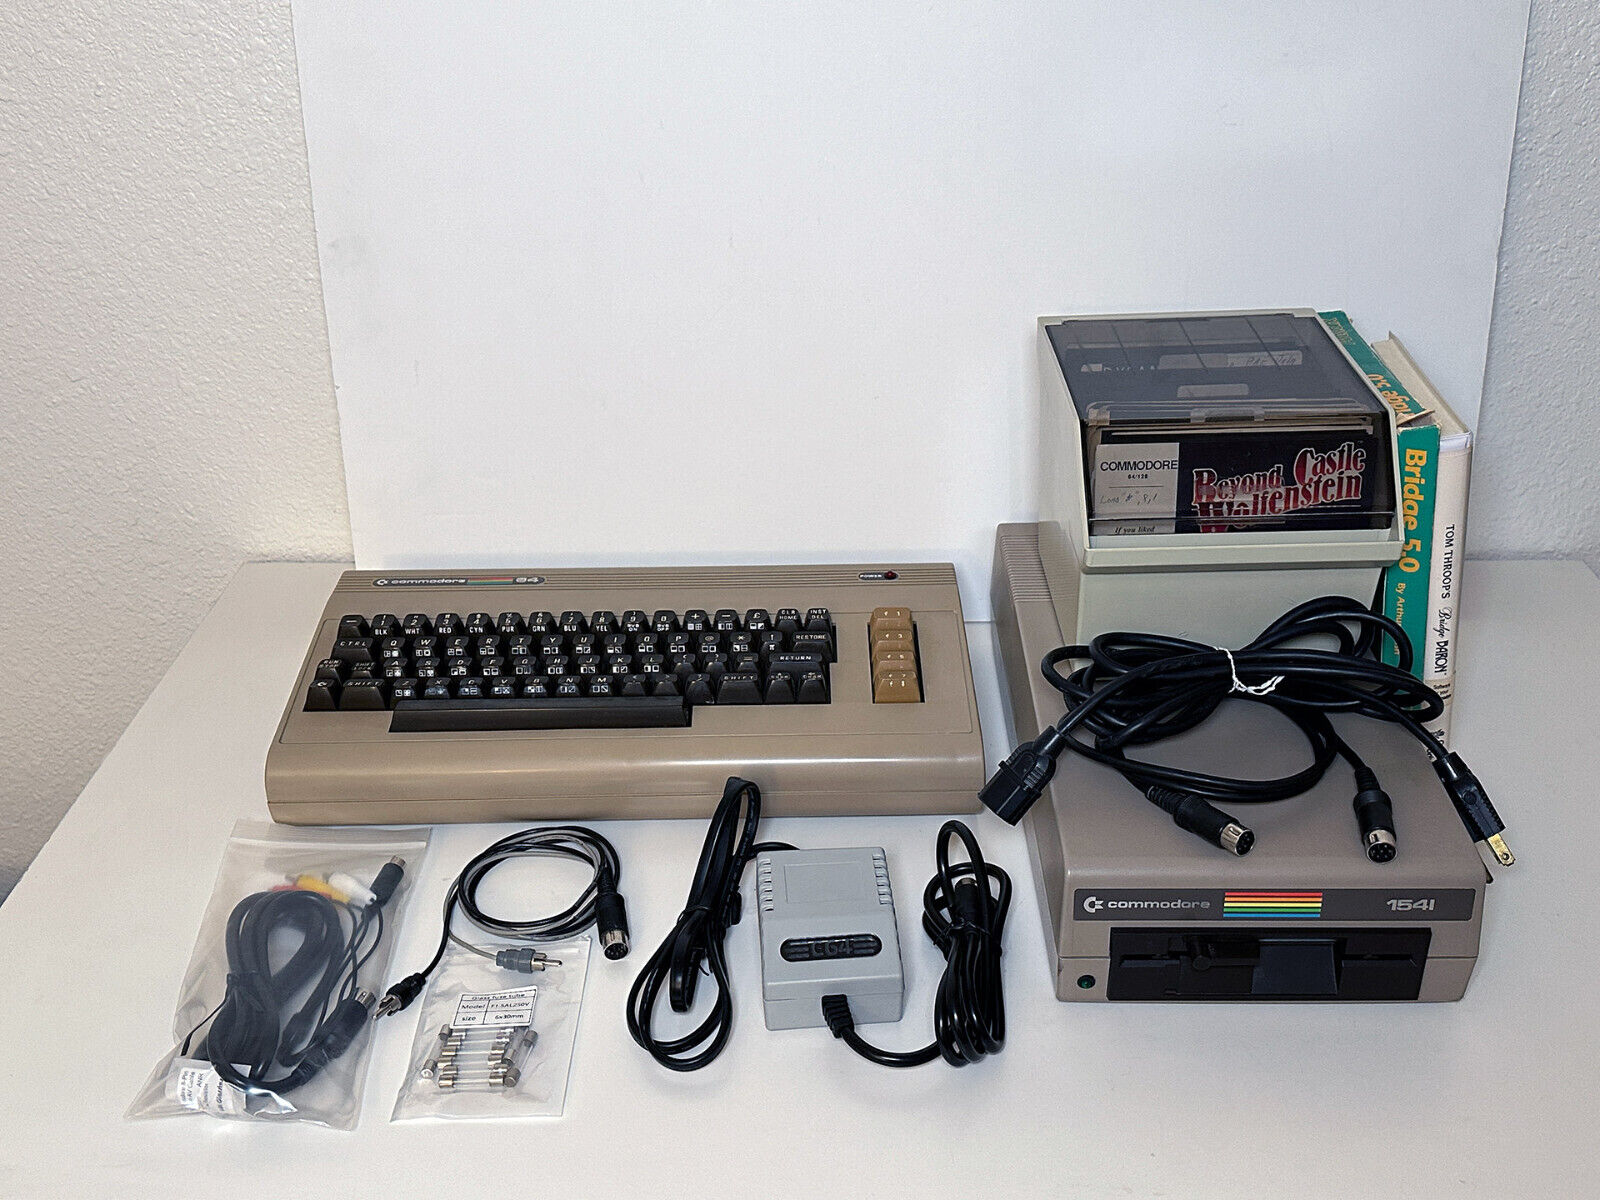 Commodore 64 Lot with 1541 Disk Drive, Joystick, Keelog PSU, Games & More Works